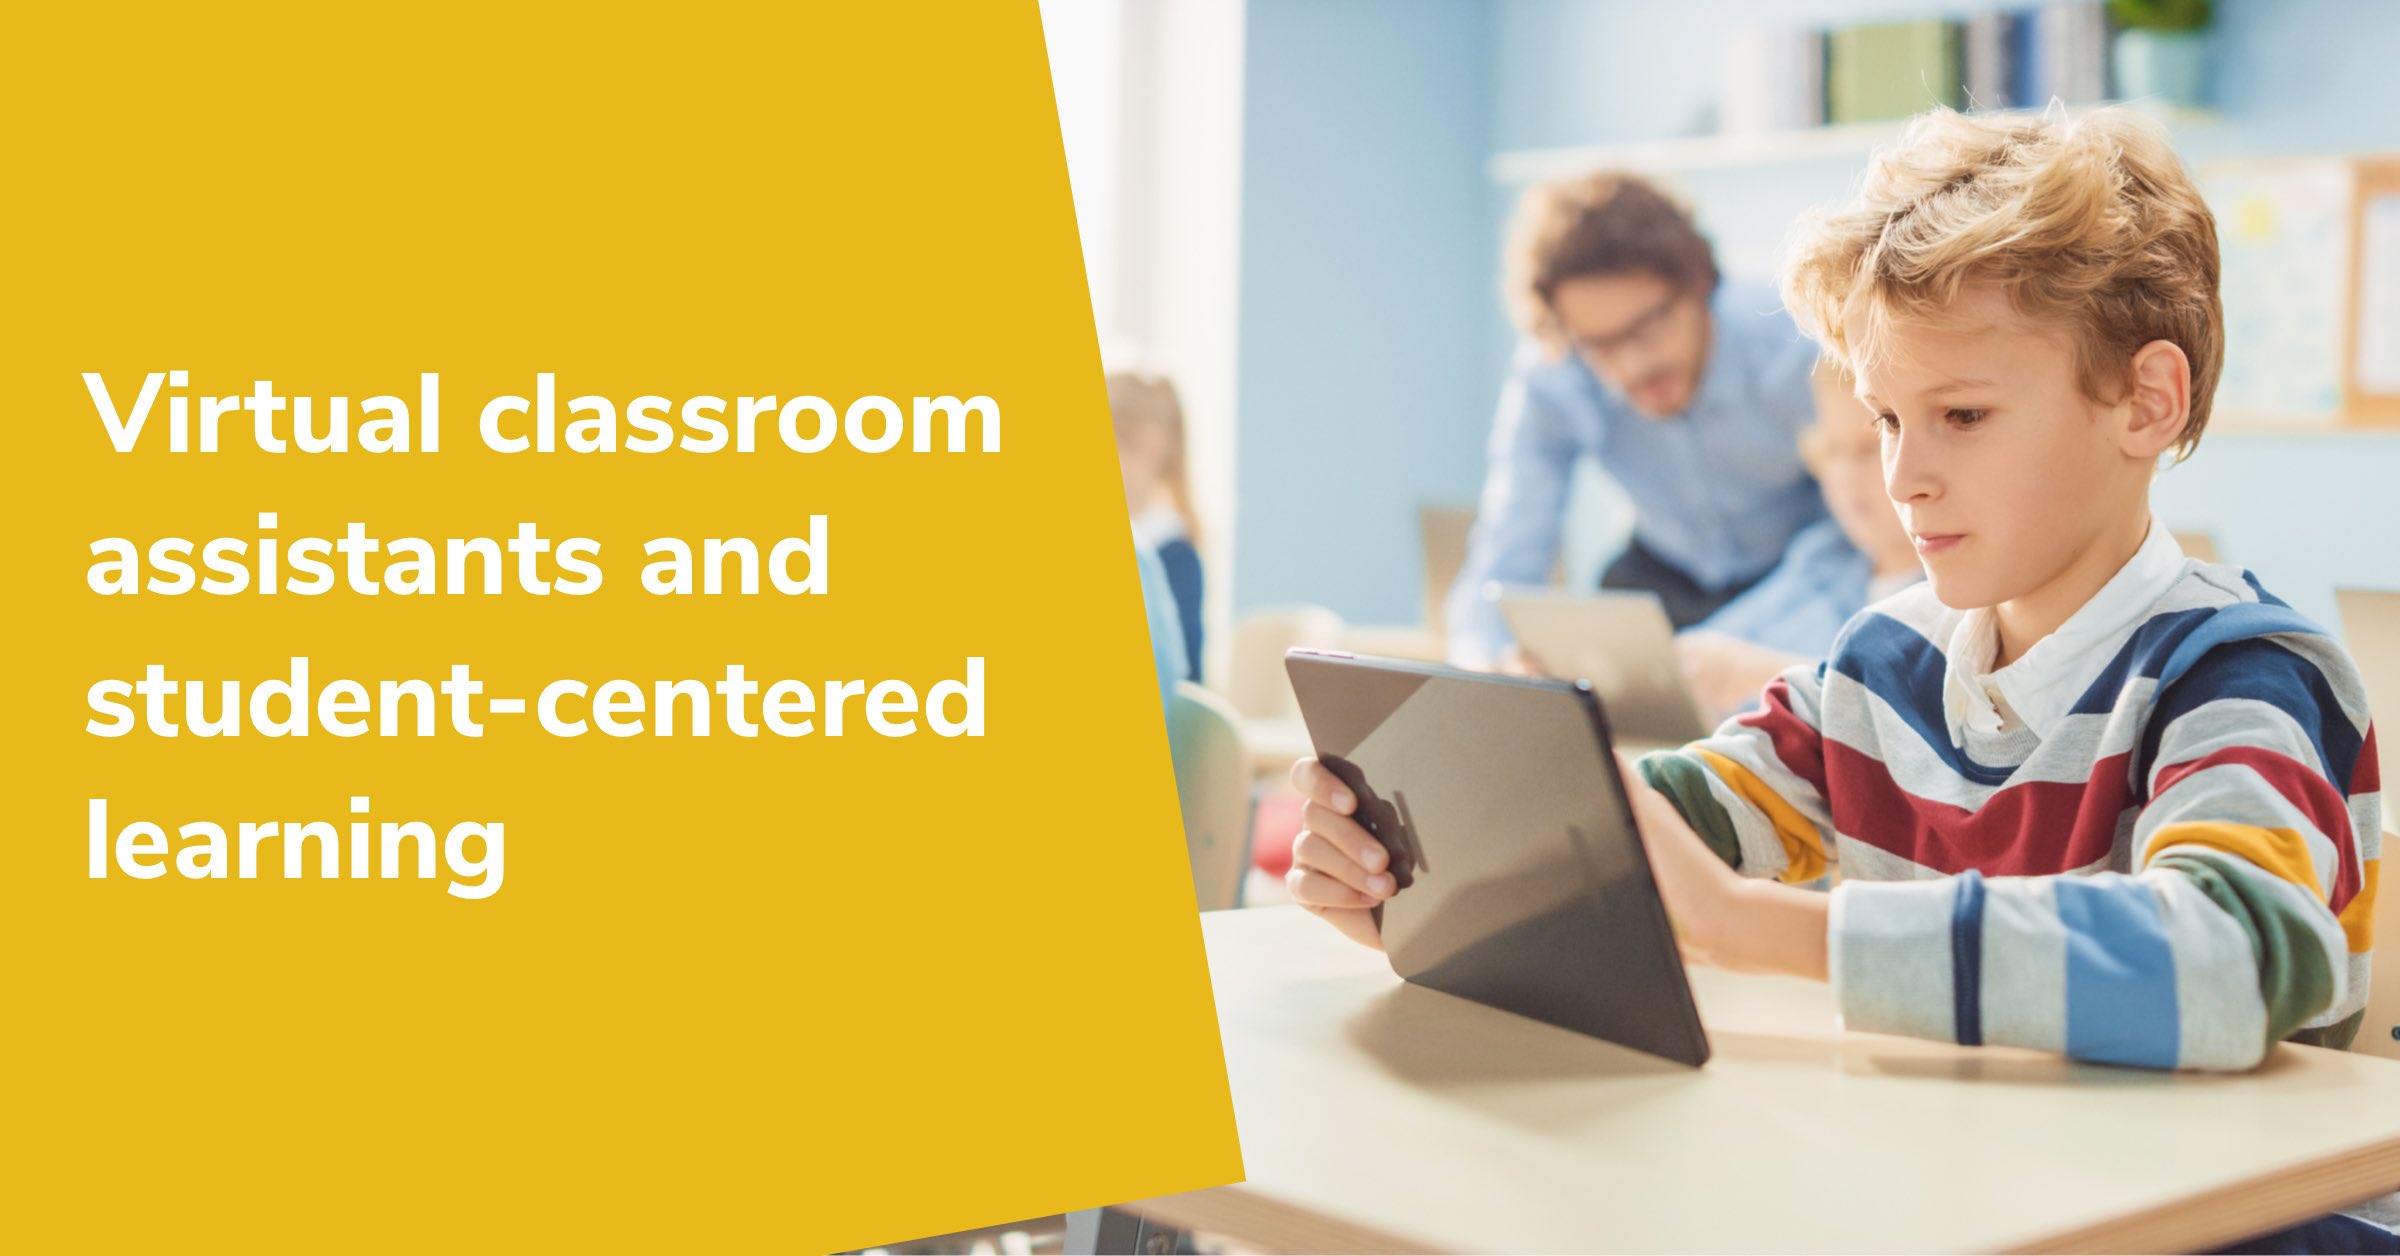 Virtual classroom assistants and student-centered learning